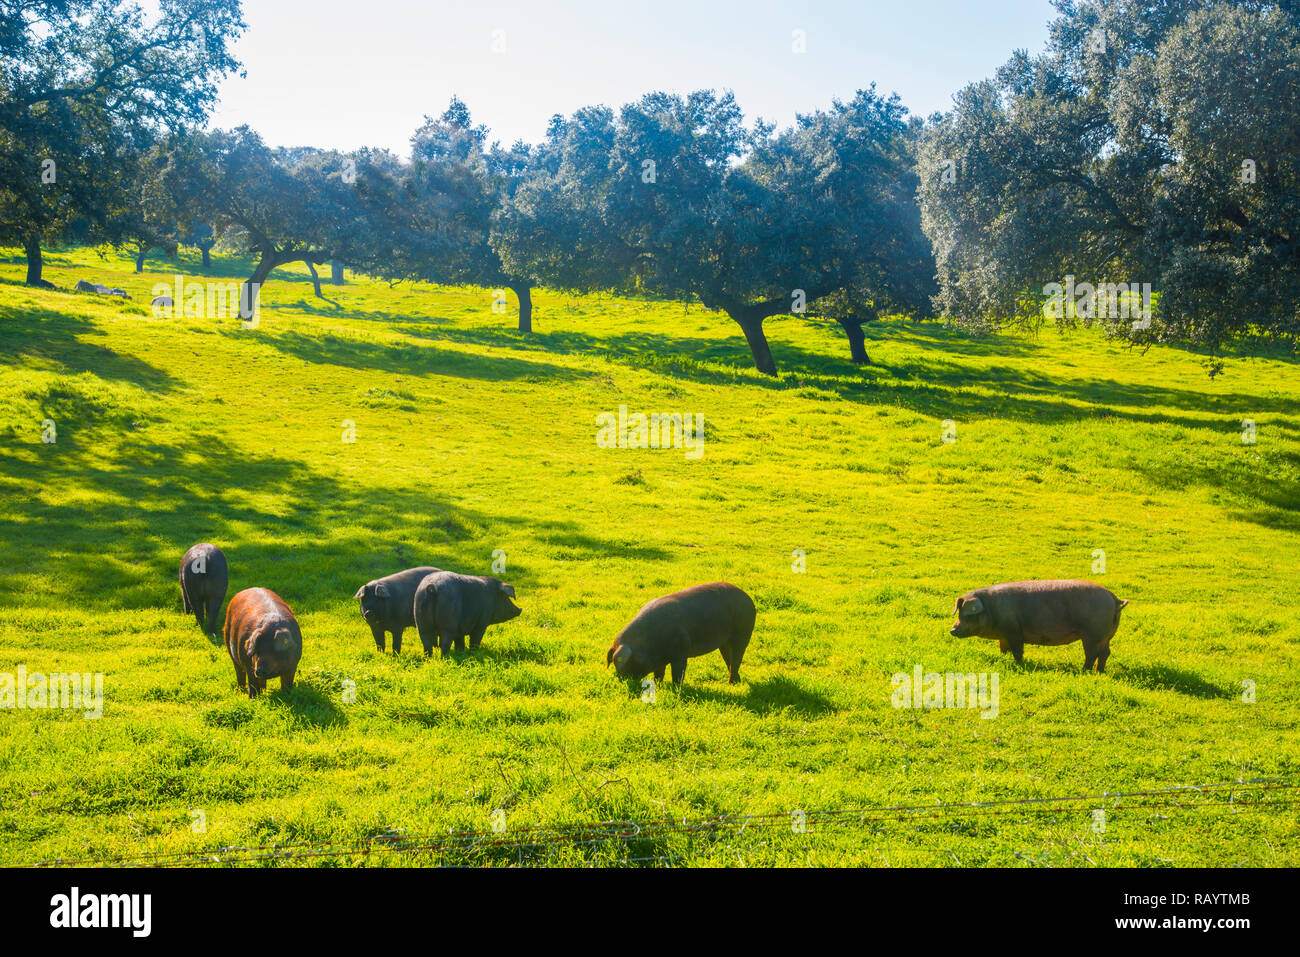 Iberian pigs in the meadow. Los Pedroches, Cordoba, Spain. Stock Photo